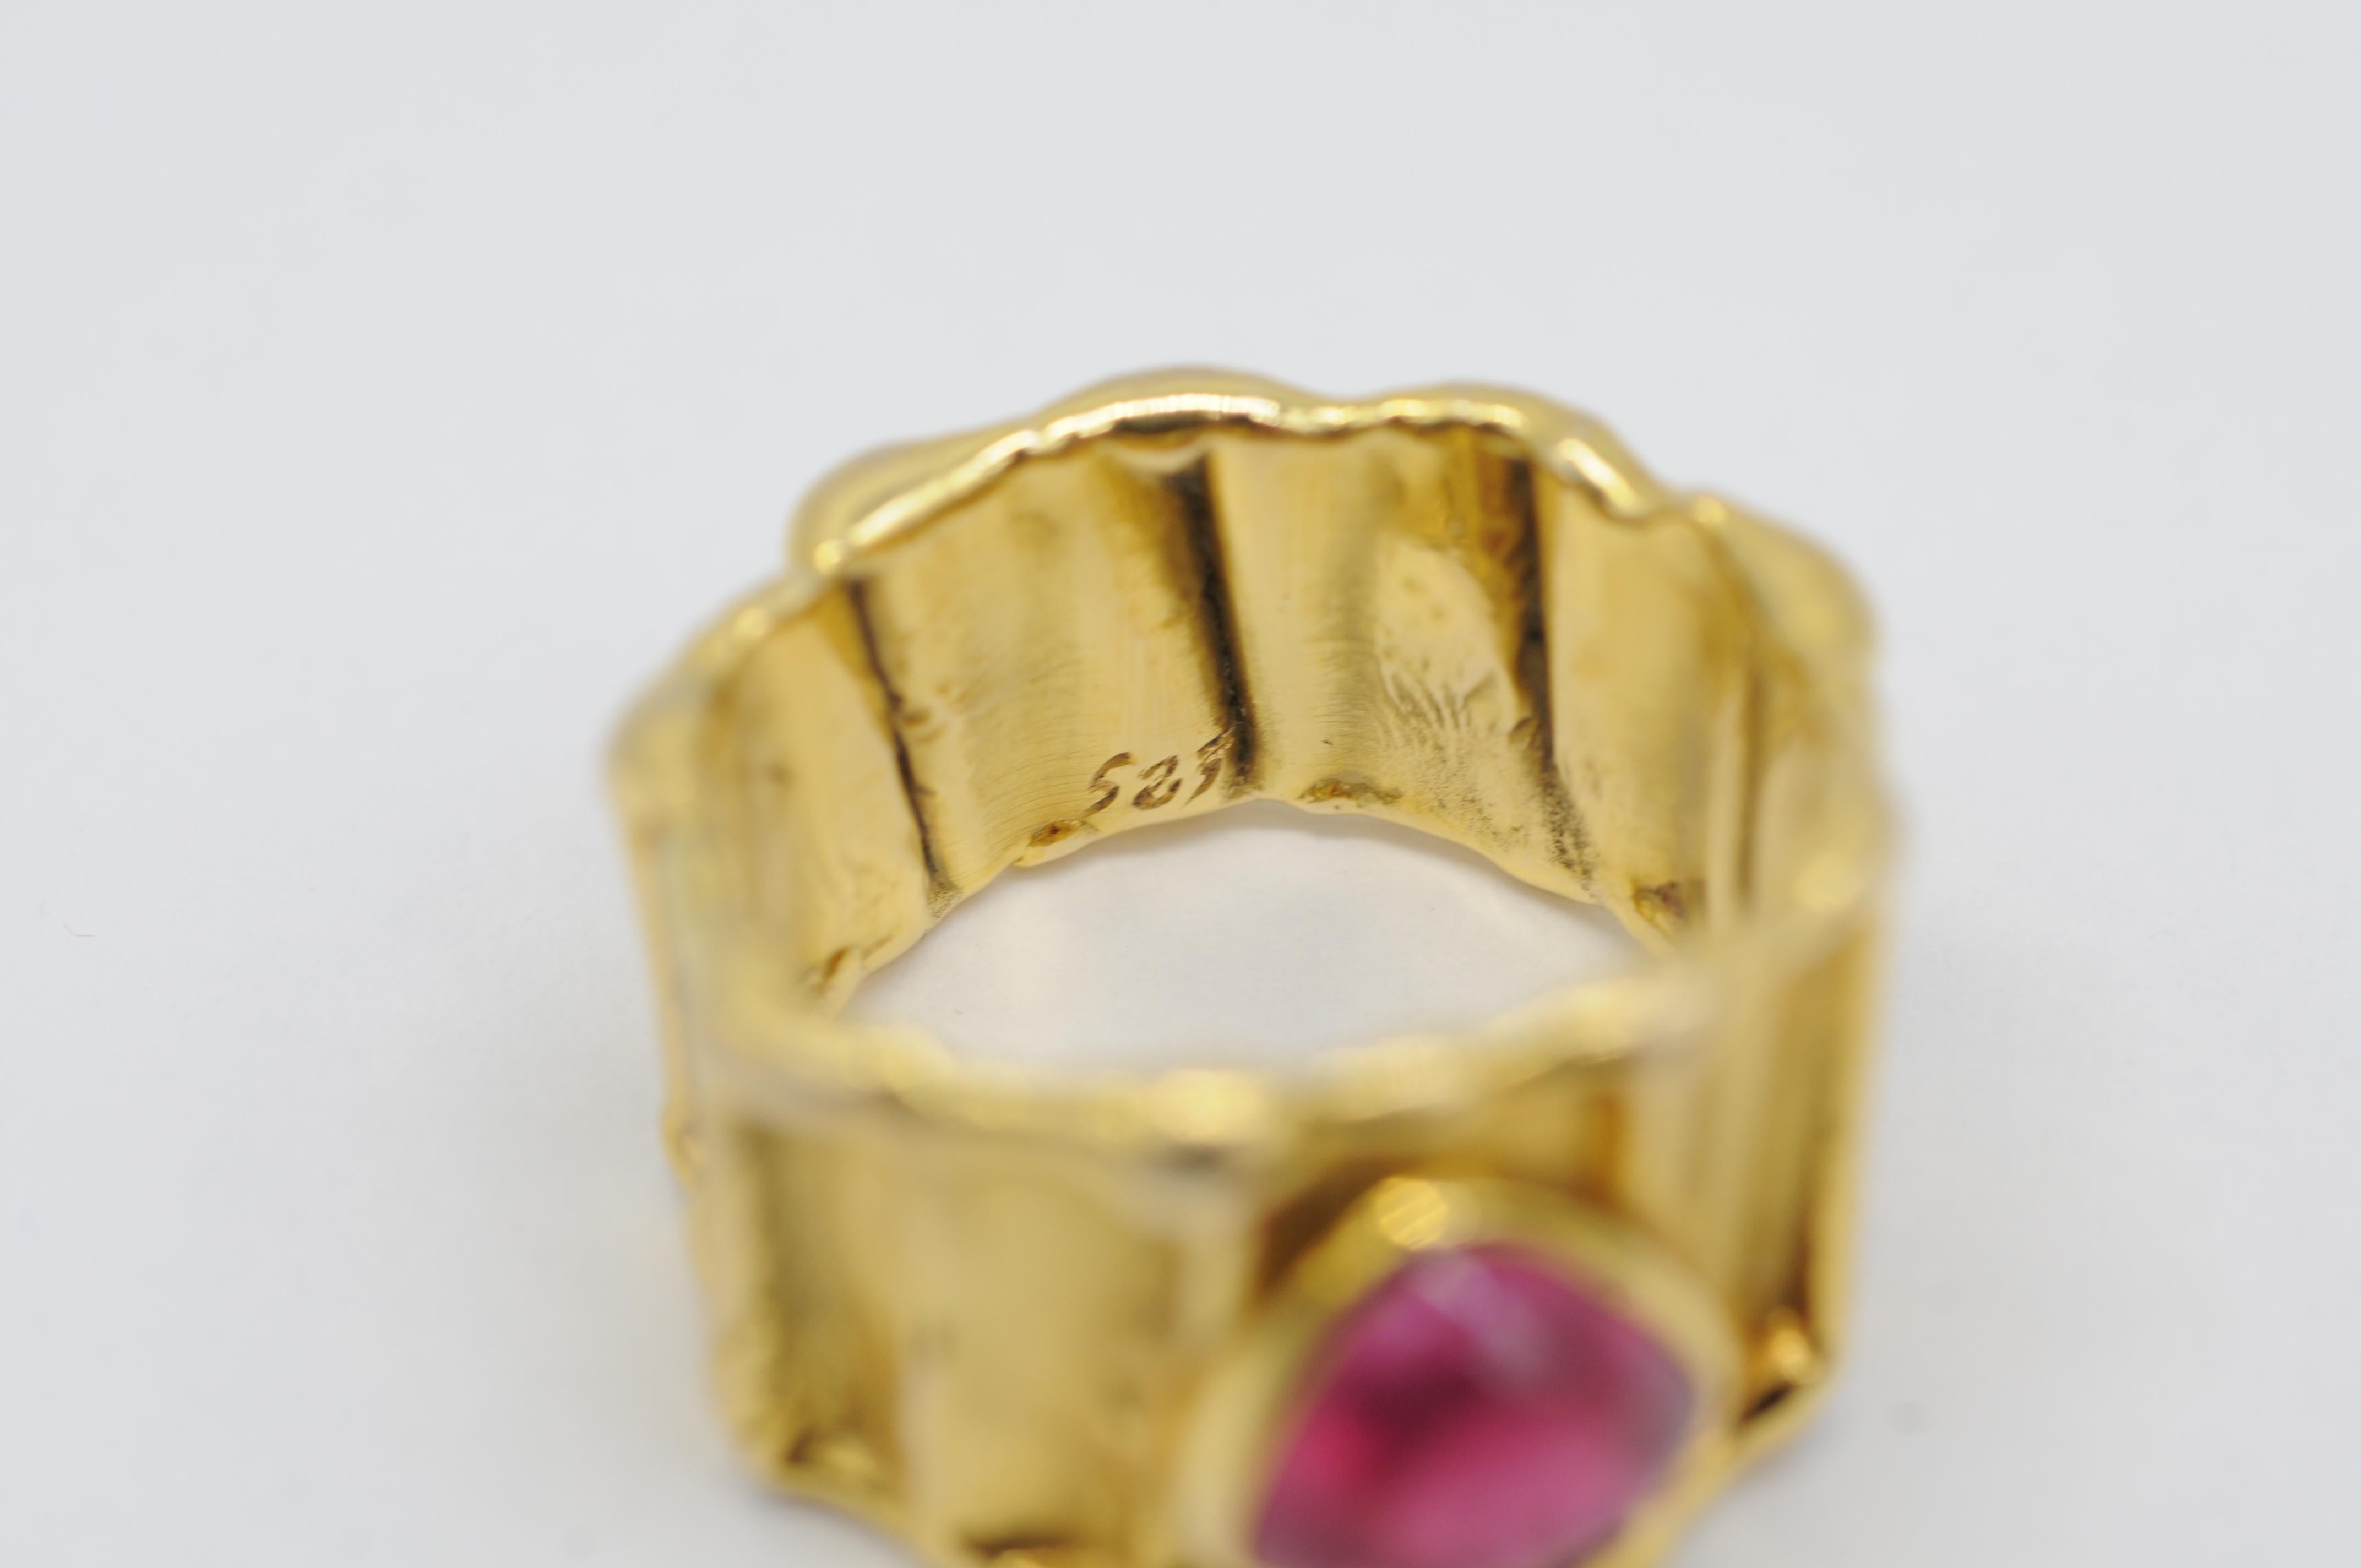 Majestic red Tourmaline ring in 14k yellow gold For Sale 7